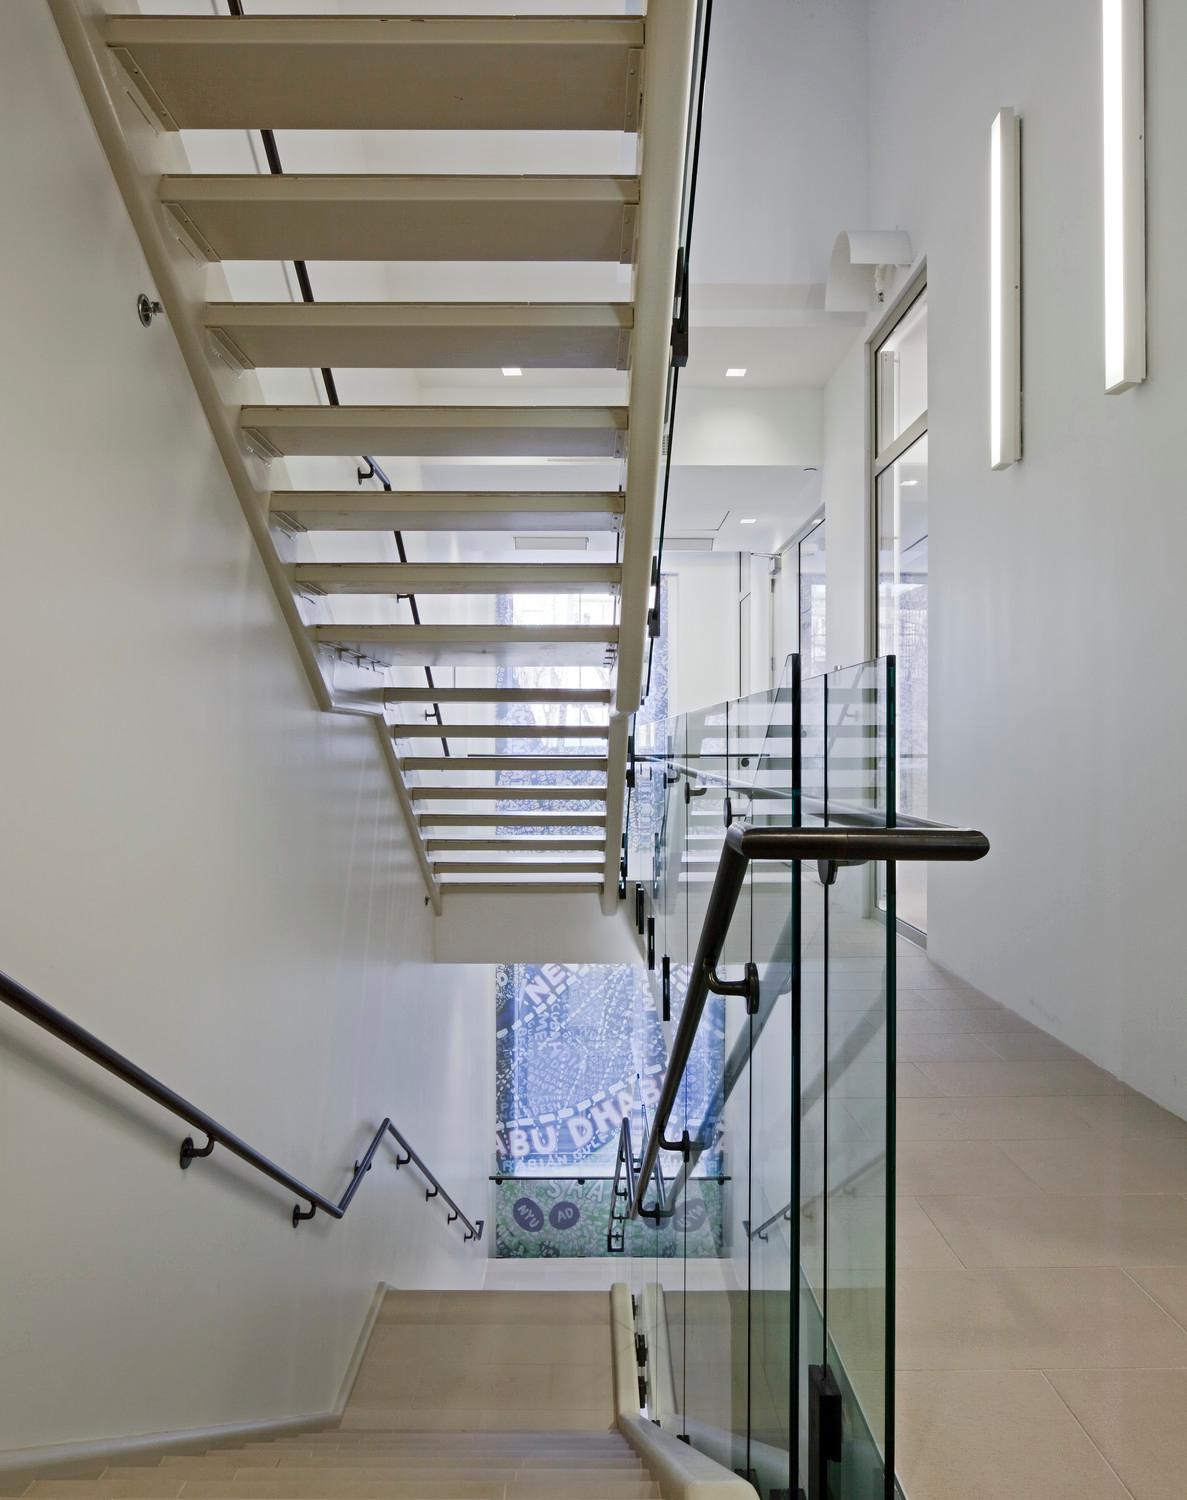 <p>Another view of the new stair</p>